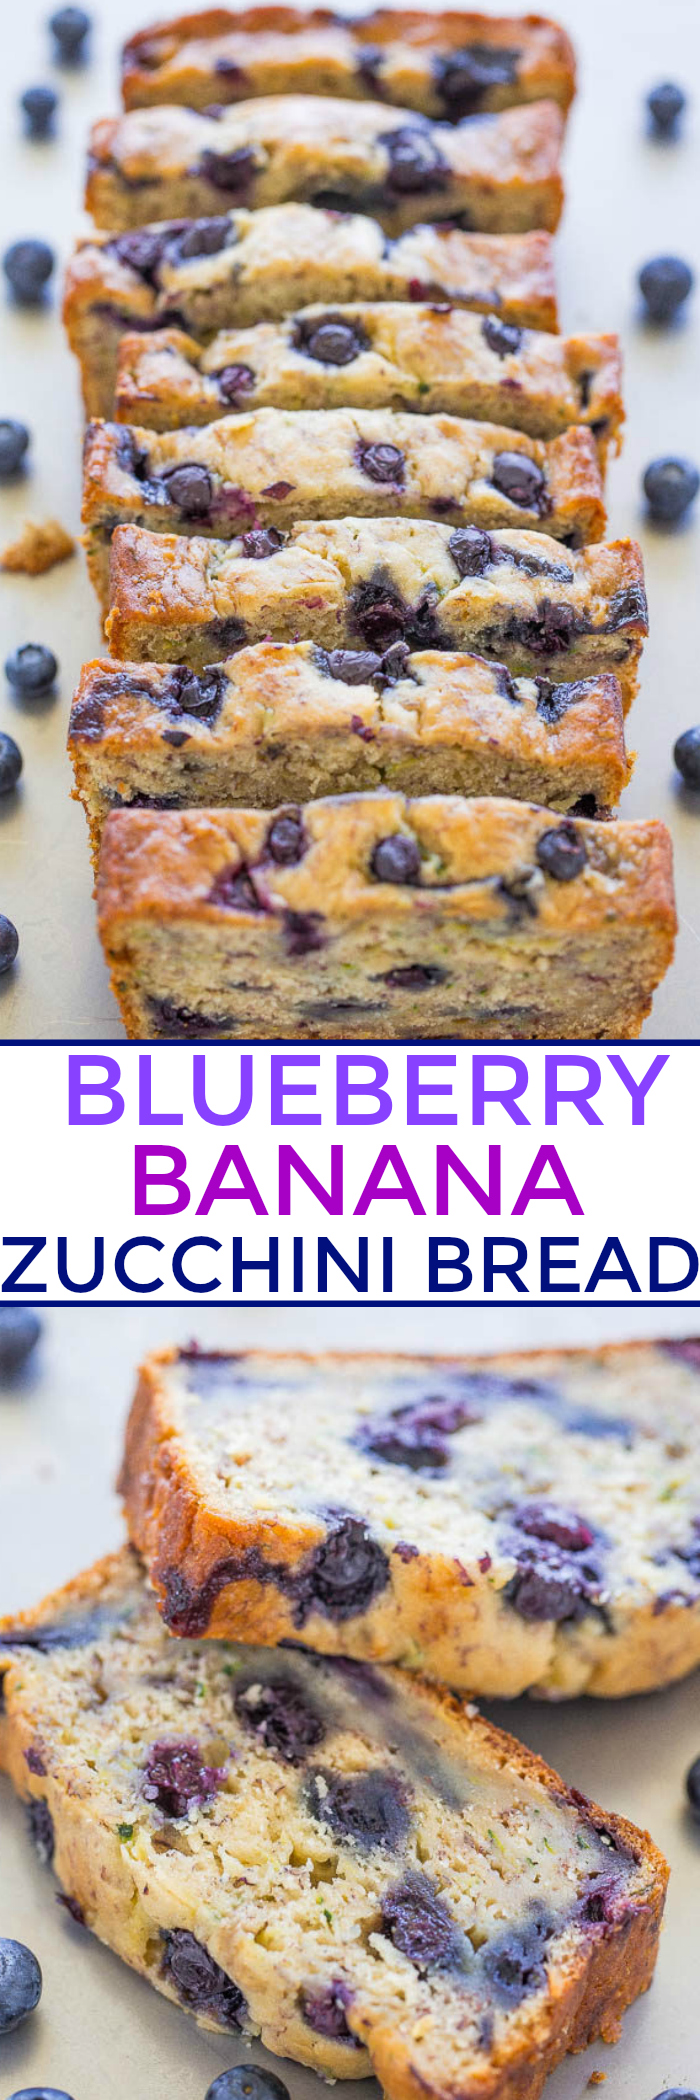 Blueberry Banana Zucchini Bread - Banana bread just got BETTER with juicy BLUEBERRIES in every bite!! The zucchini (you can't taste it) keeps it moist and HEALTHY! Easy and DELICIOUS!!